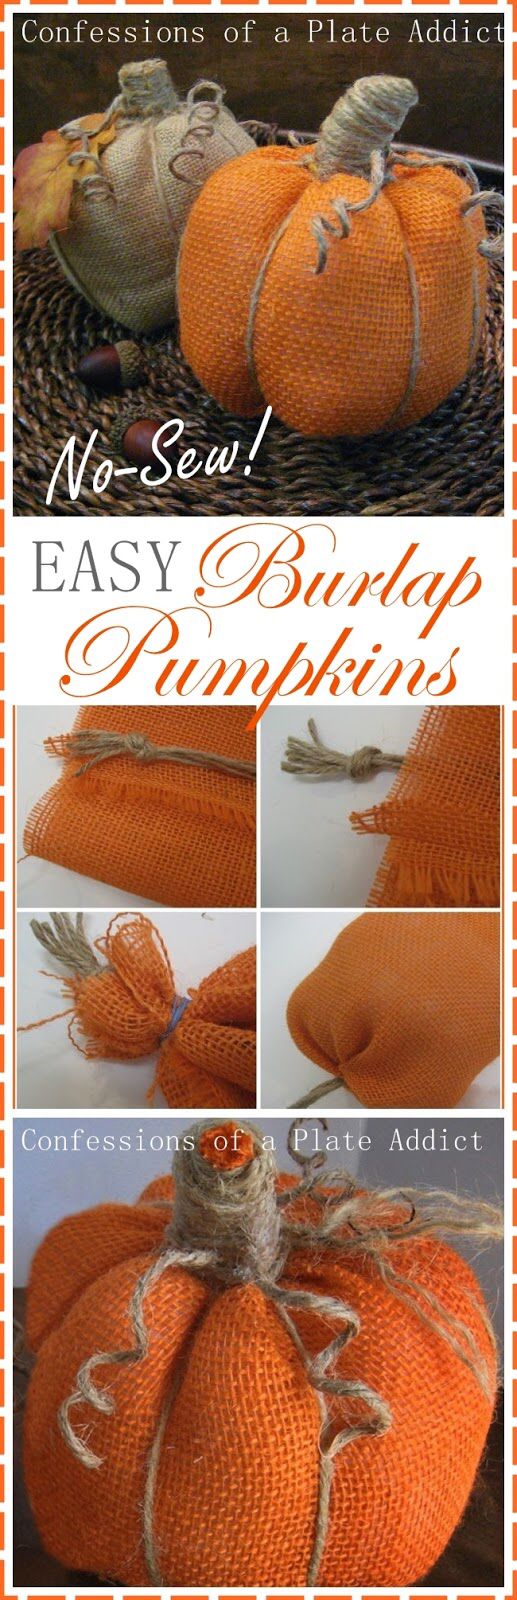 No-Sew Burlap Pumpkins...these are the BEST Fall Craft Ideas & DIY Home Decor Projects!